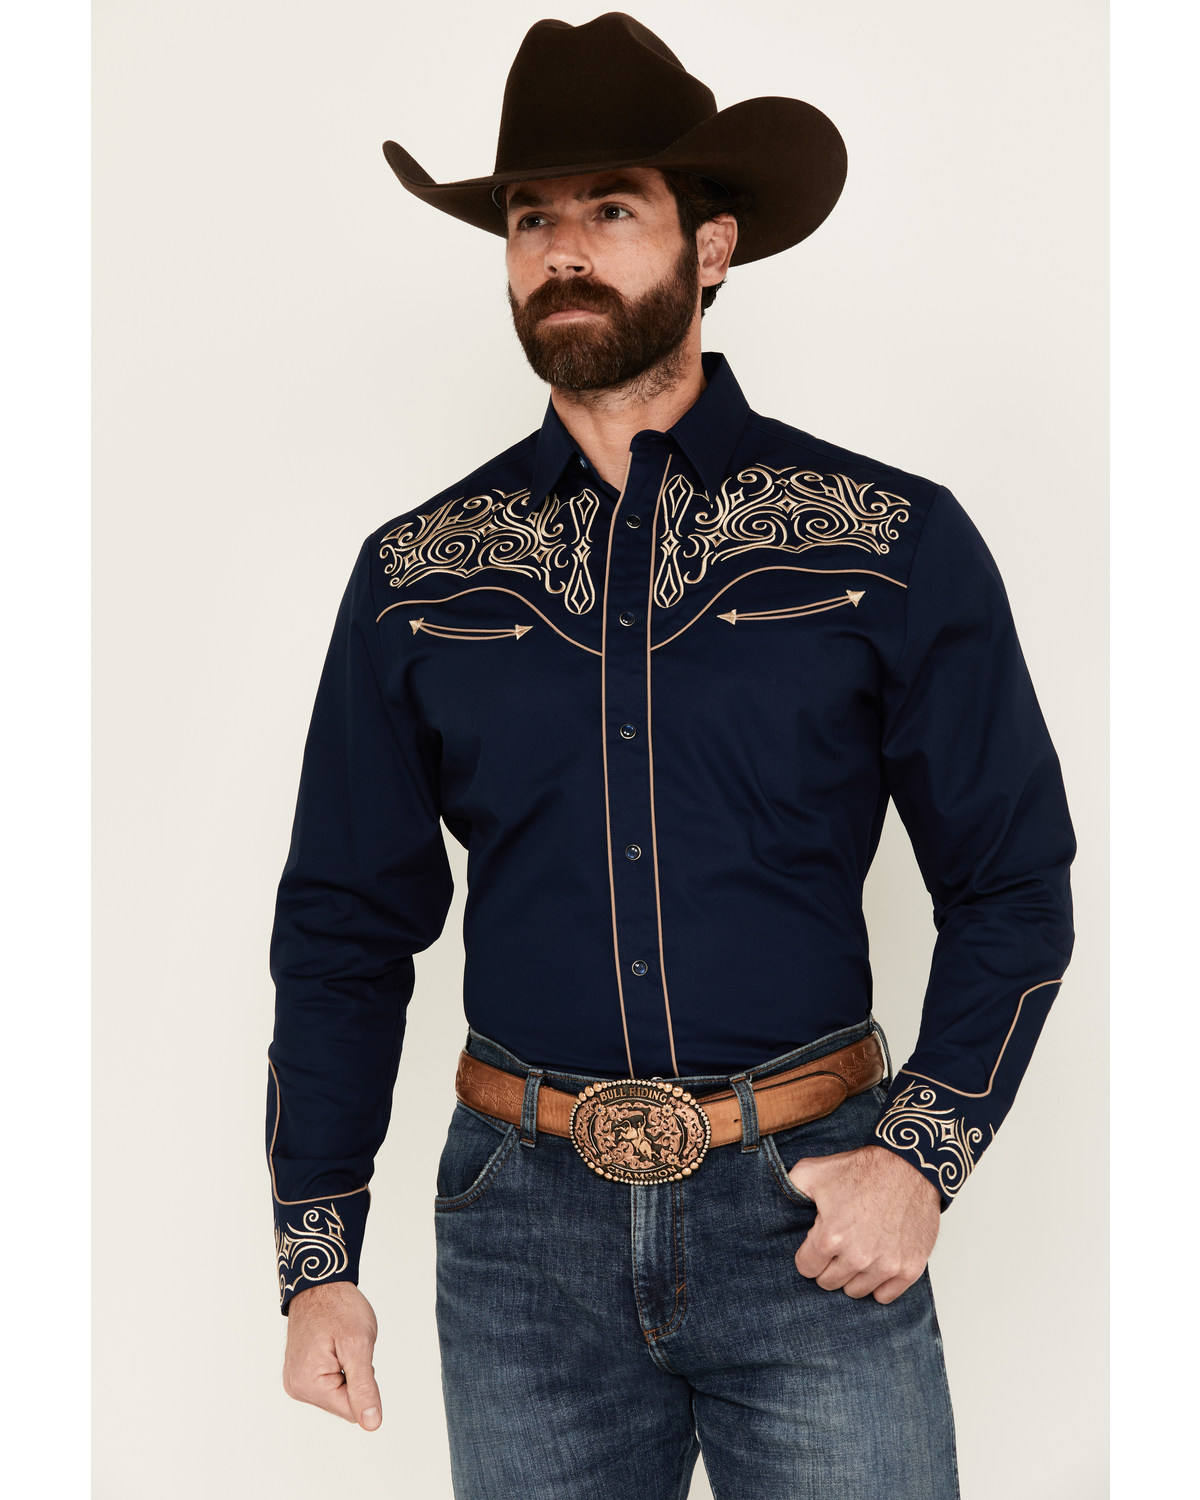 Rodeo Clothing Men's Fancy Smiley Yoke Embroidered Long Sleeve Pearl Snap Western Shirt